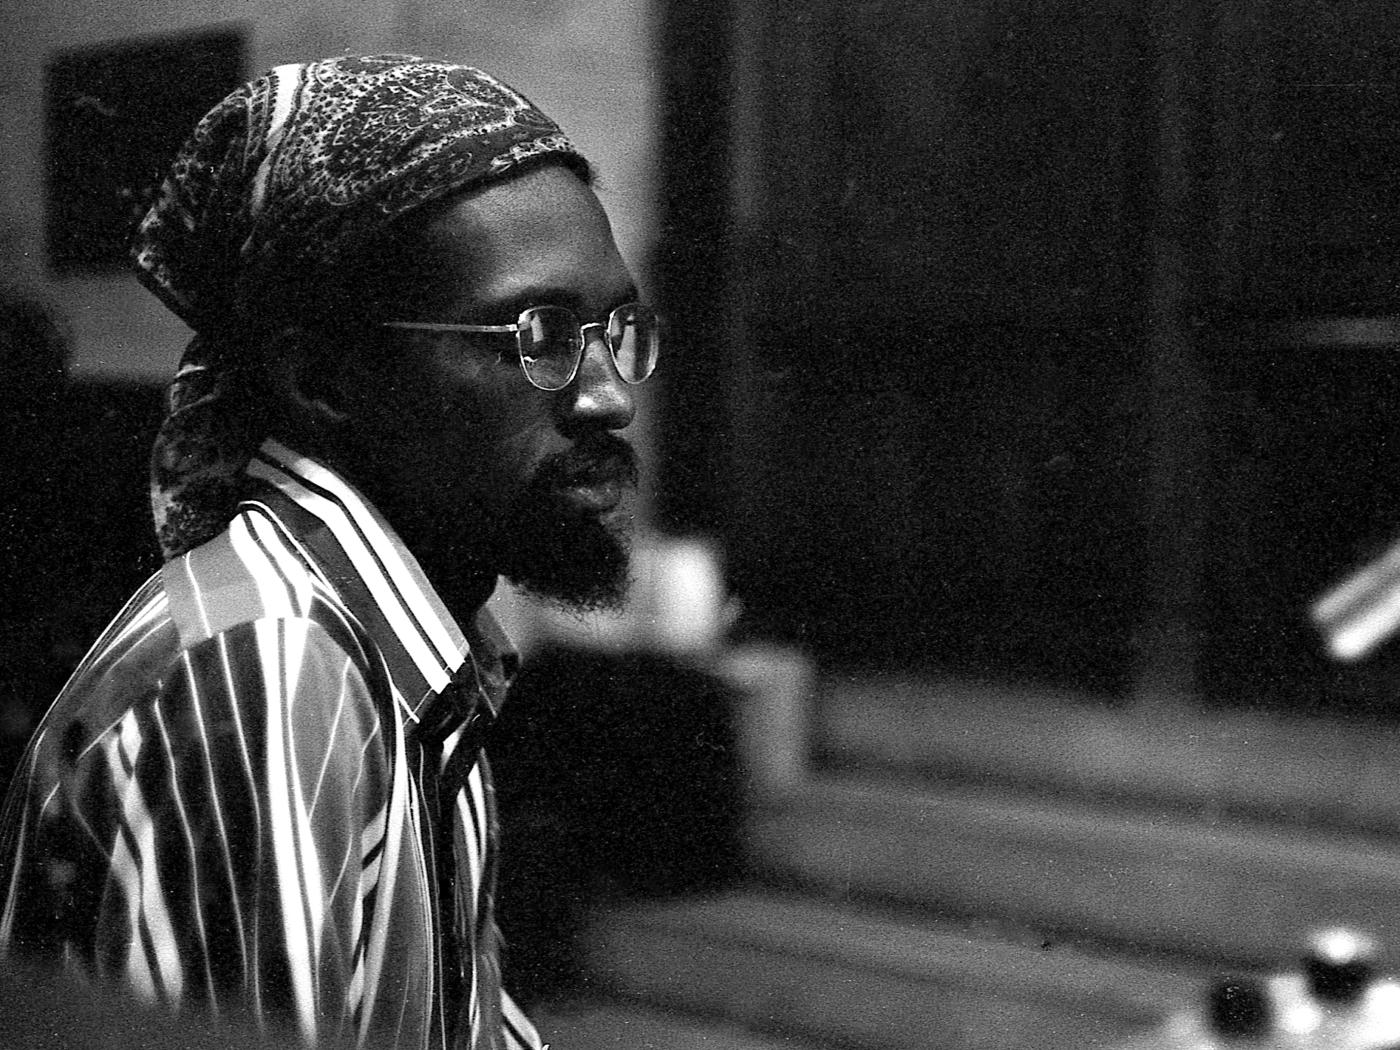 What Wild Up unearths on <em>Julius Eastman, Vol. 2: Joy Boy</em><em> </em>is more than just music, it's a set of relations and modes of comporting in the world that risk trading fleeting, worldly praise to regain the eternal soul.